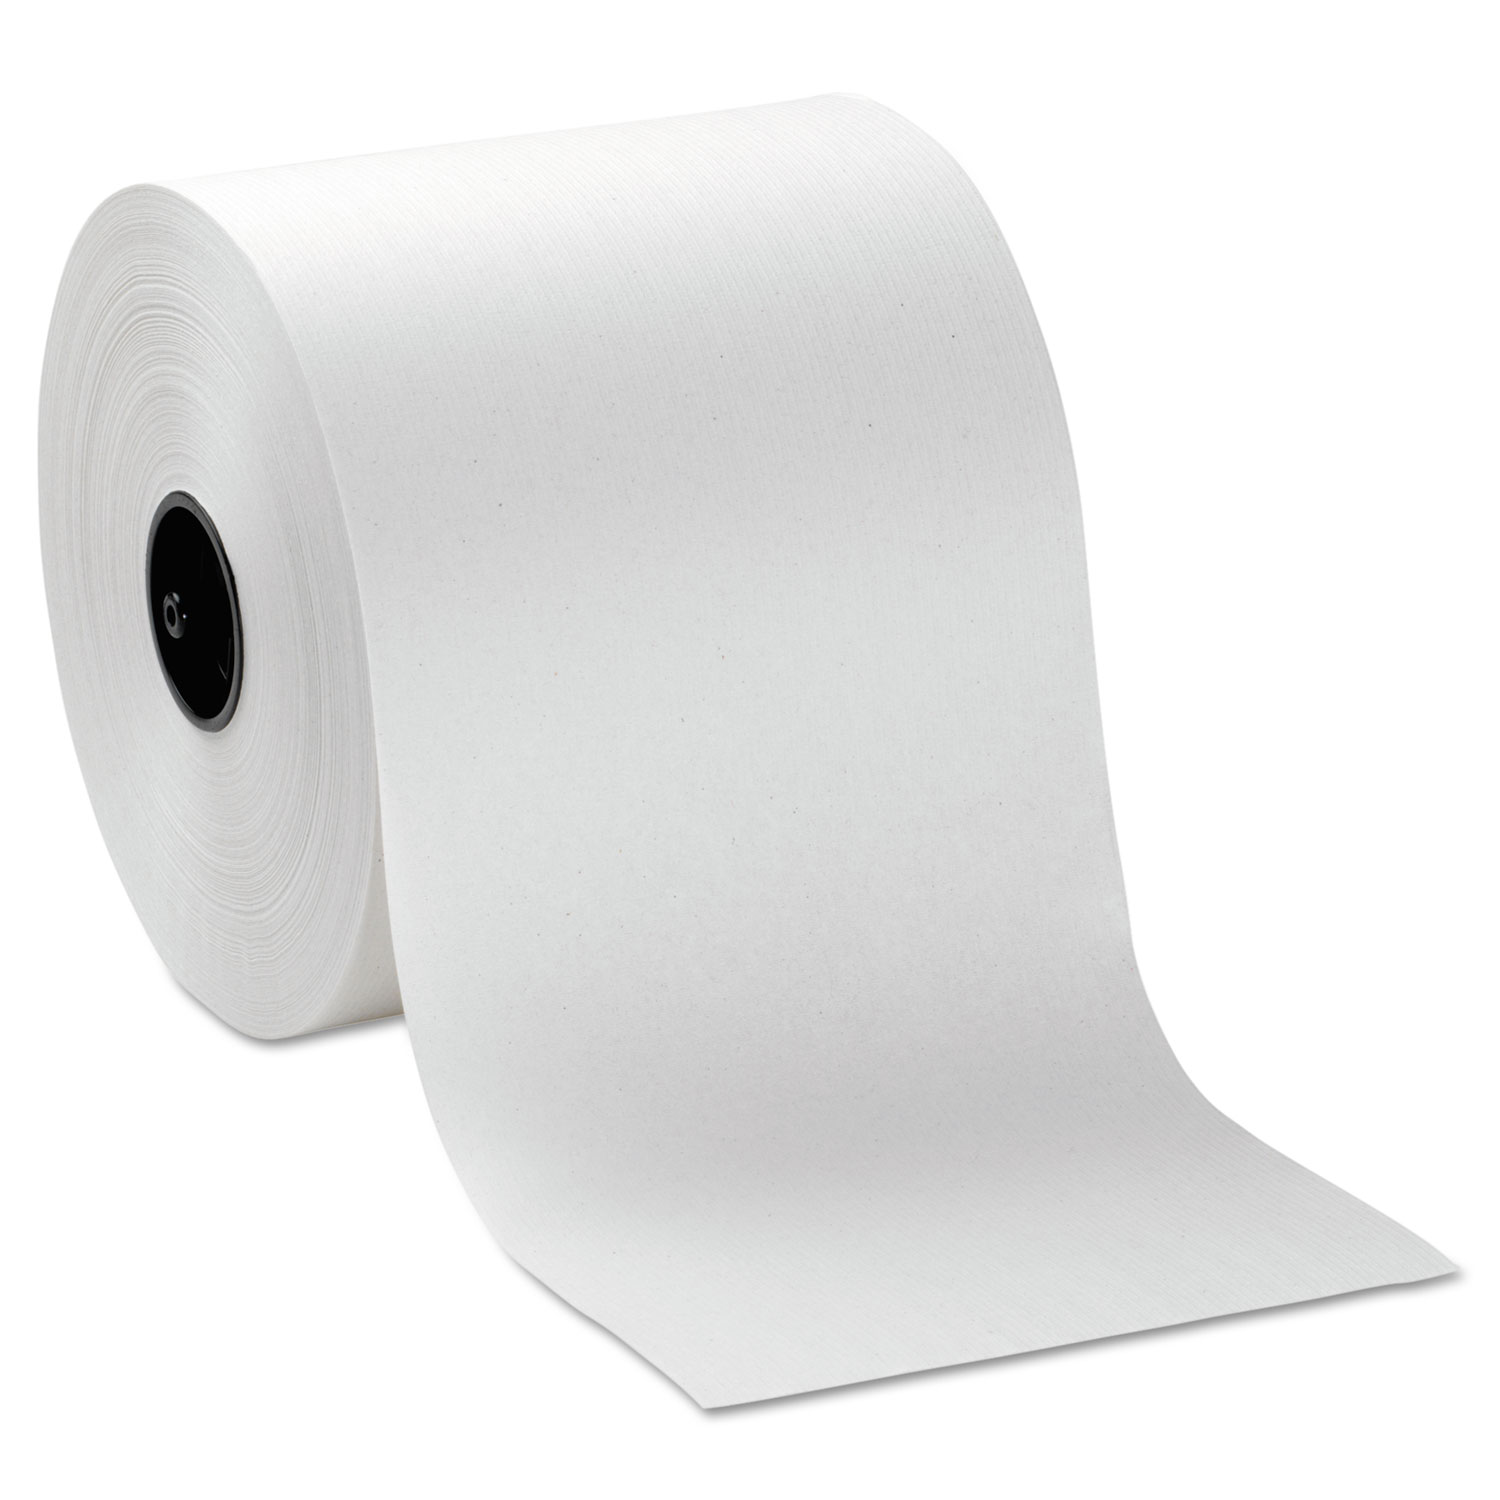  Georgia Pacific Professional 26910 Hardwound Roll Paper Towels, 7 x 1000ft, White, 6 Rolls/Carton (GPC26910) 